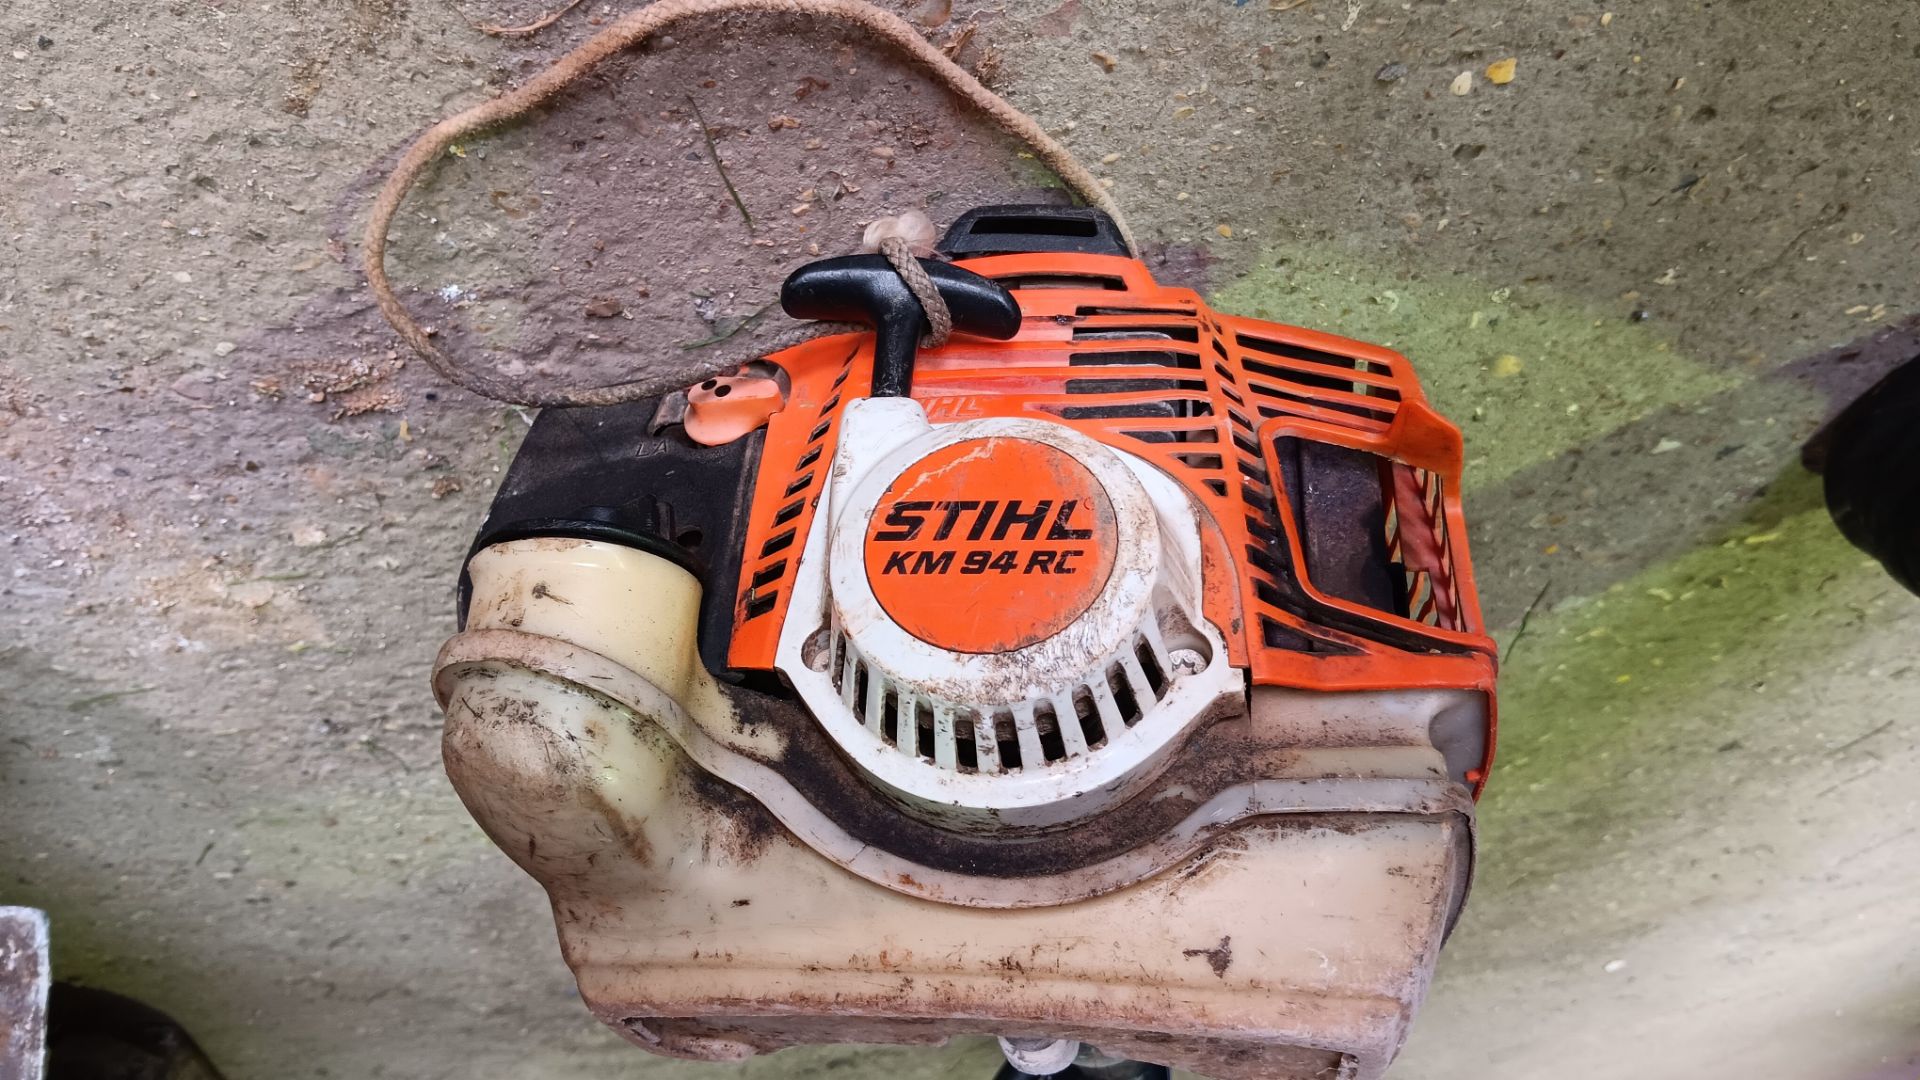 Stihl KM94RC petrol combi engine with KB/KM power brush attachment - Image 4 of 5